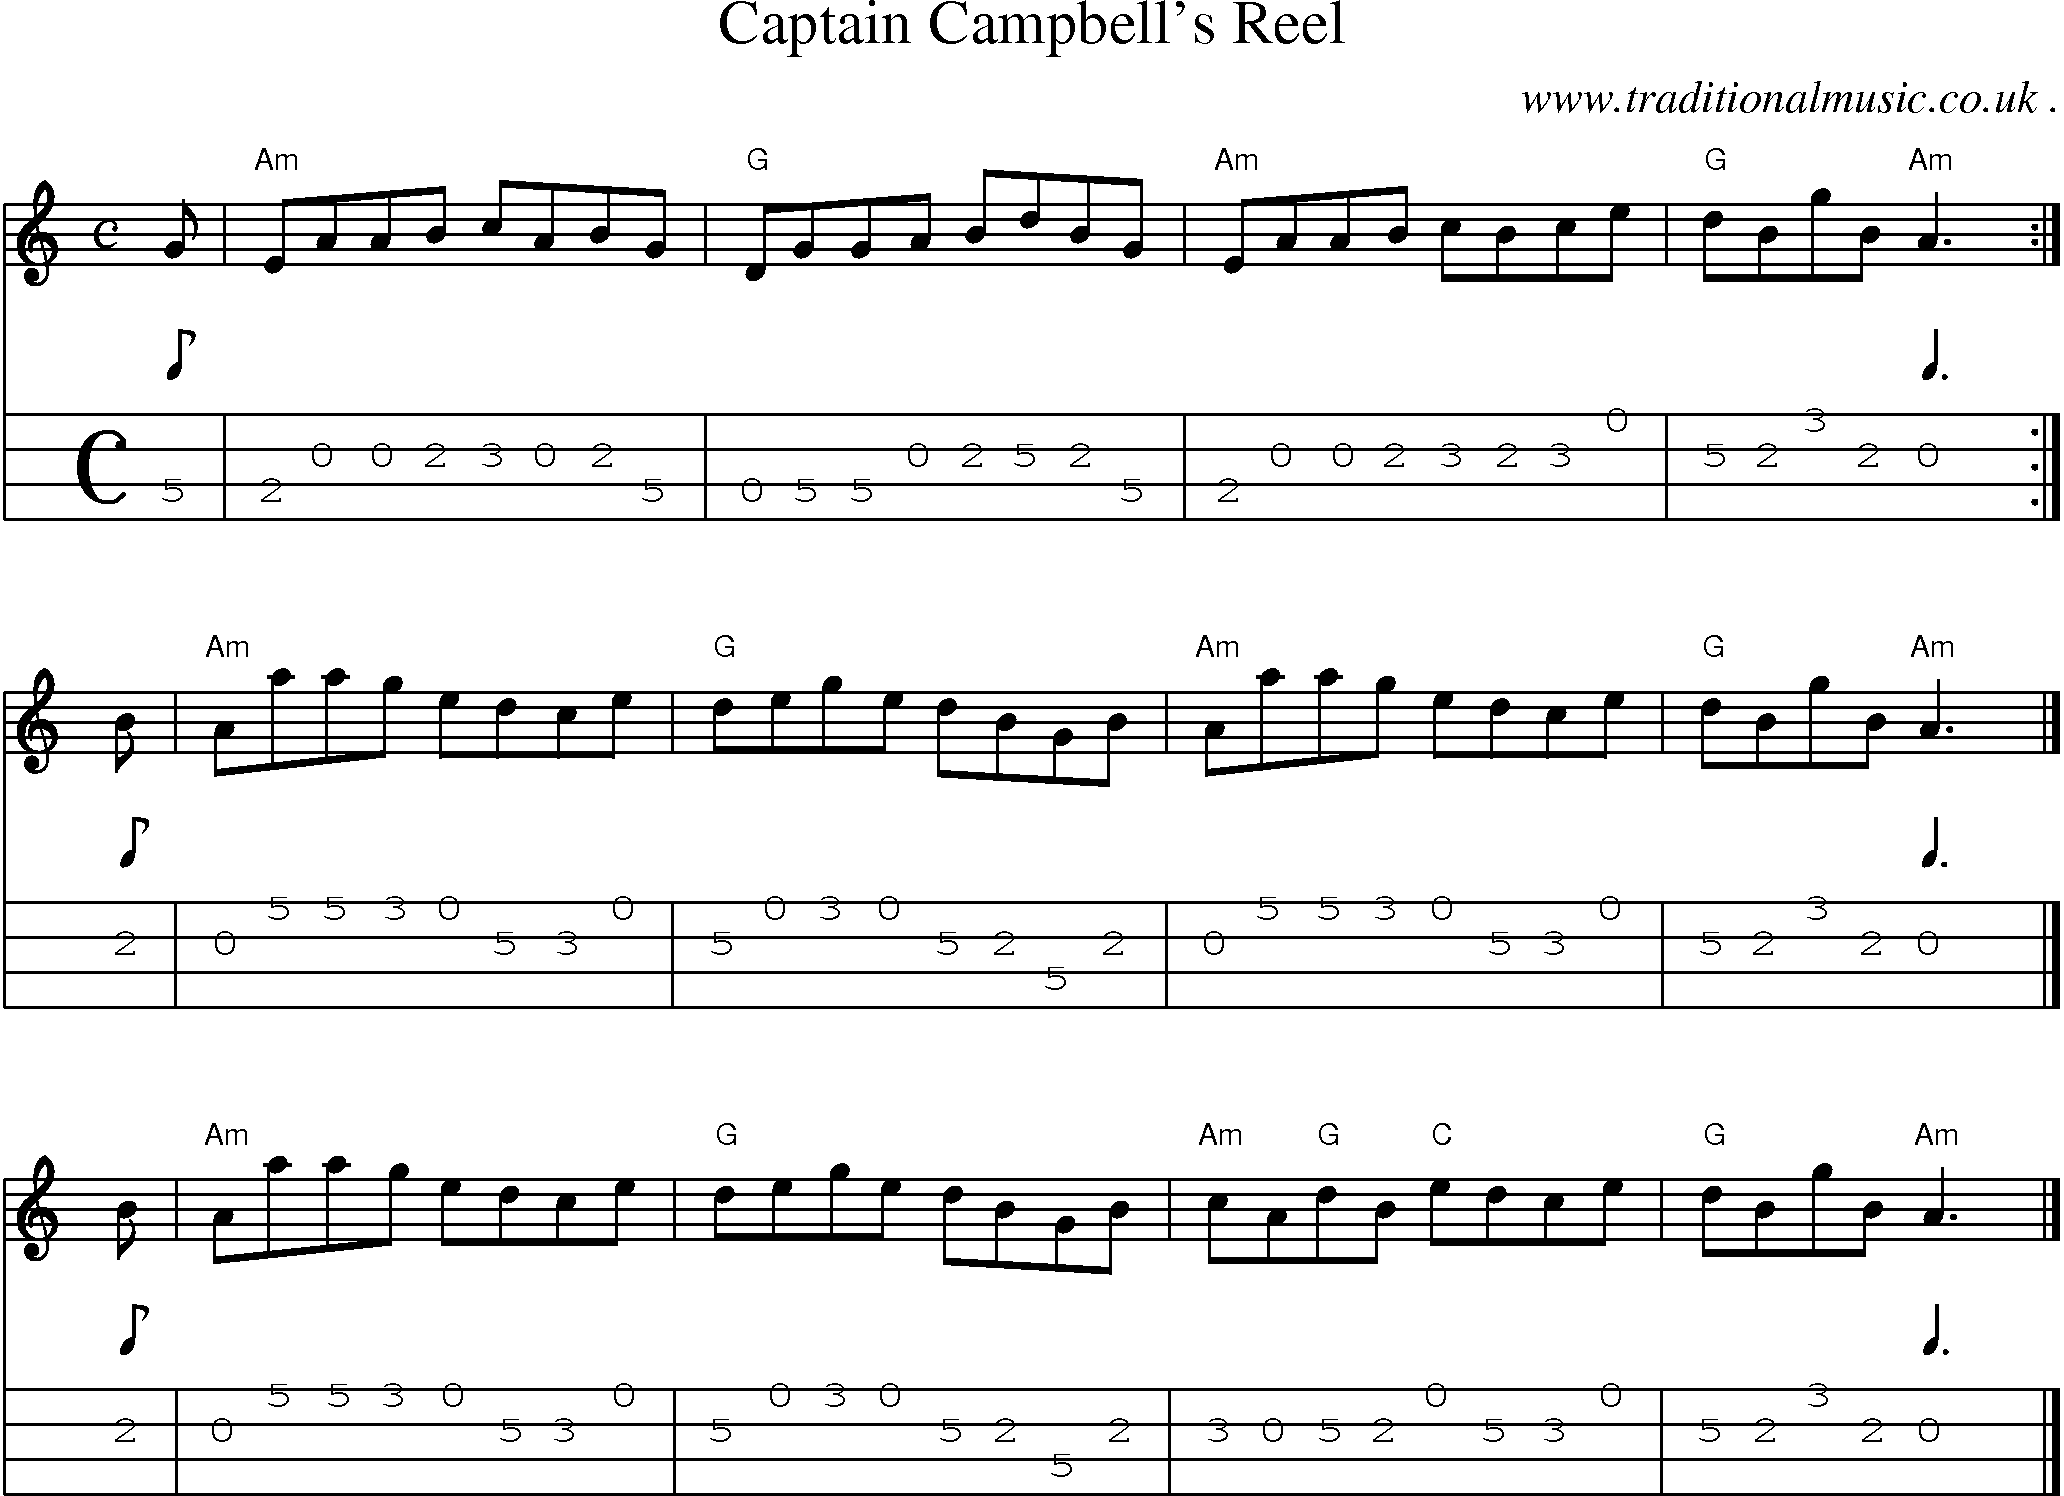 Sheet-music  score, Chords and Mandolin Tabs for Captain Campbells Reel